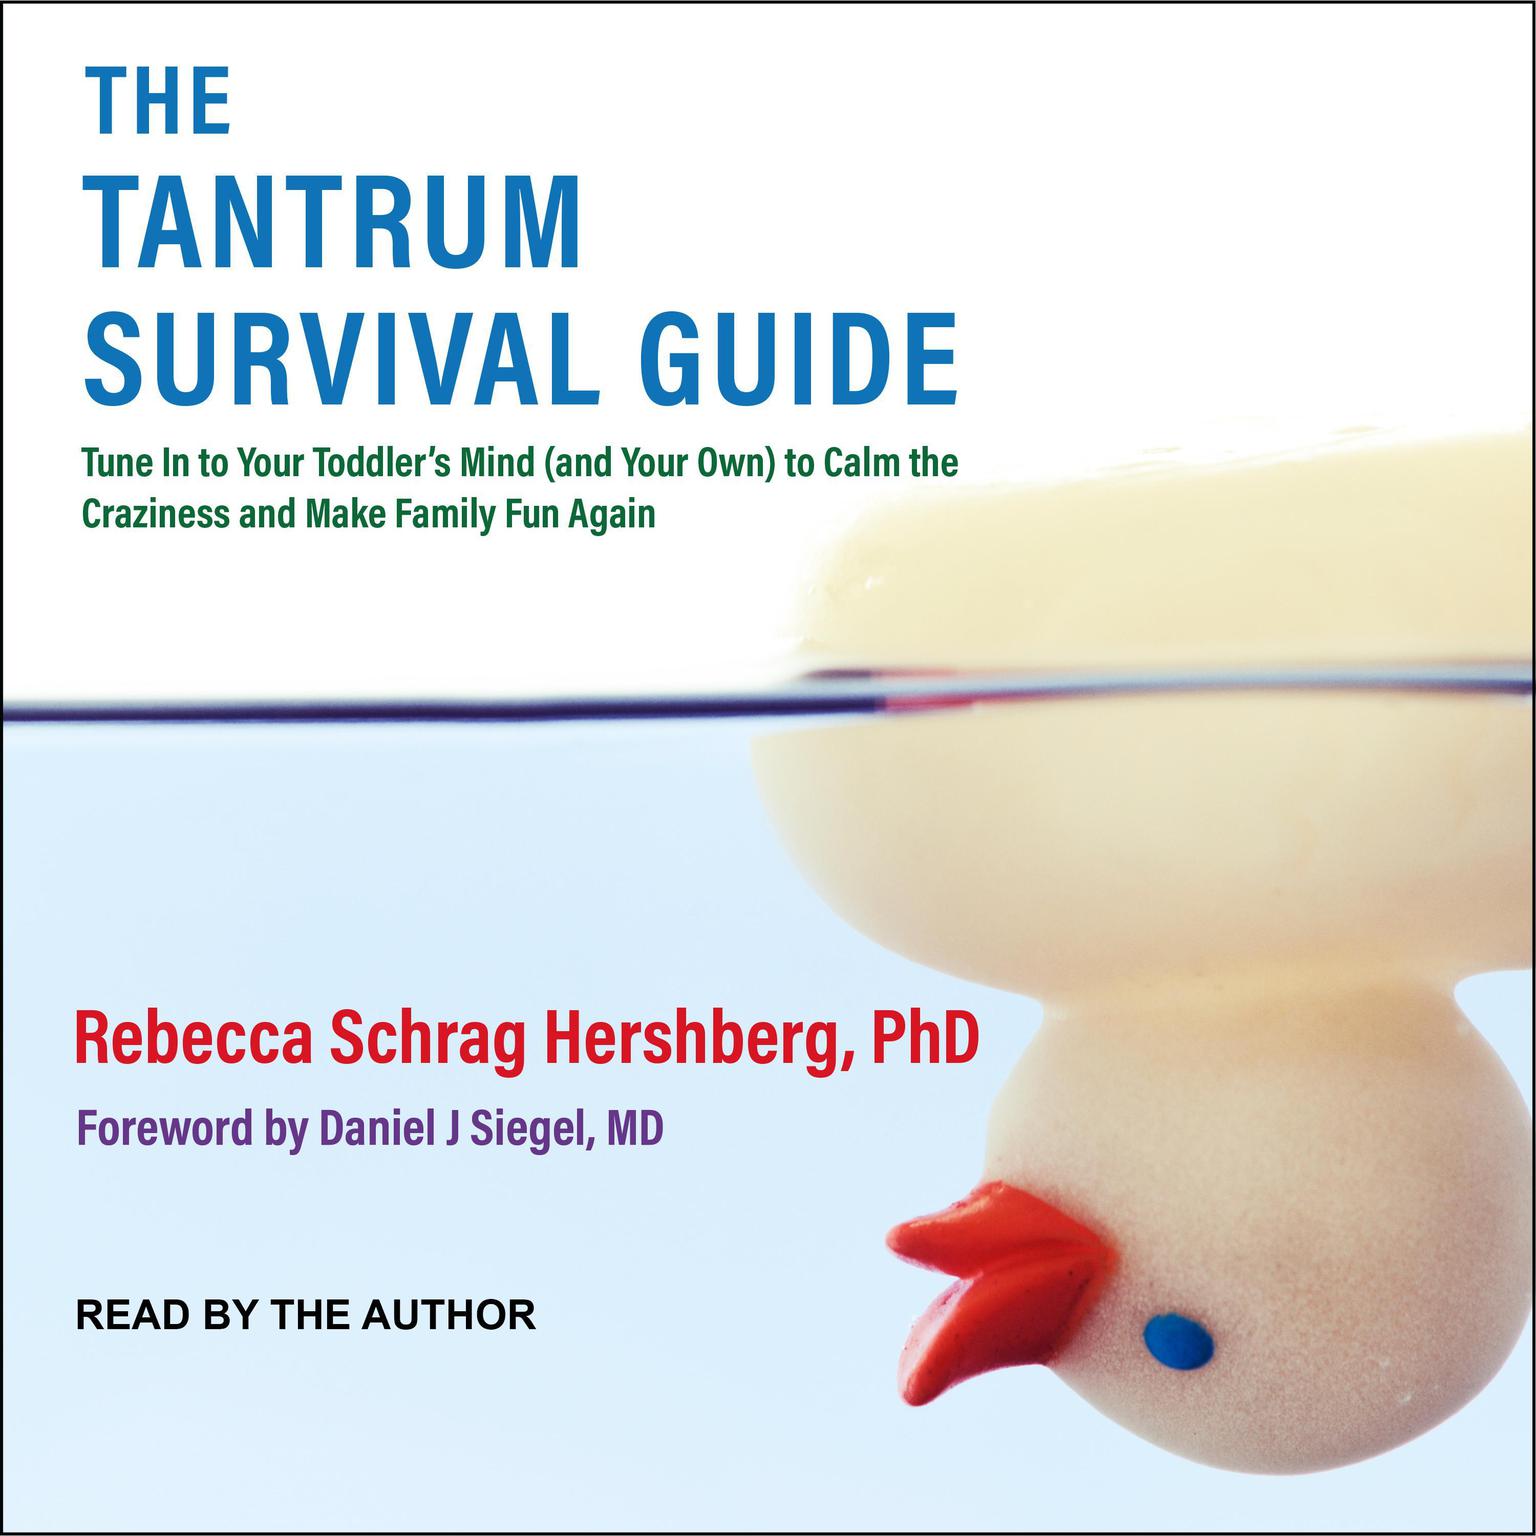 The Tantrum Survival Guide: Tune In to Your Toddlers Mind (and Your Own) to Calm the Craziness and Make Family Fun Again Audiobook, by Rebecca Schrag Hershberg